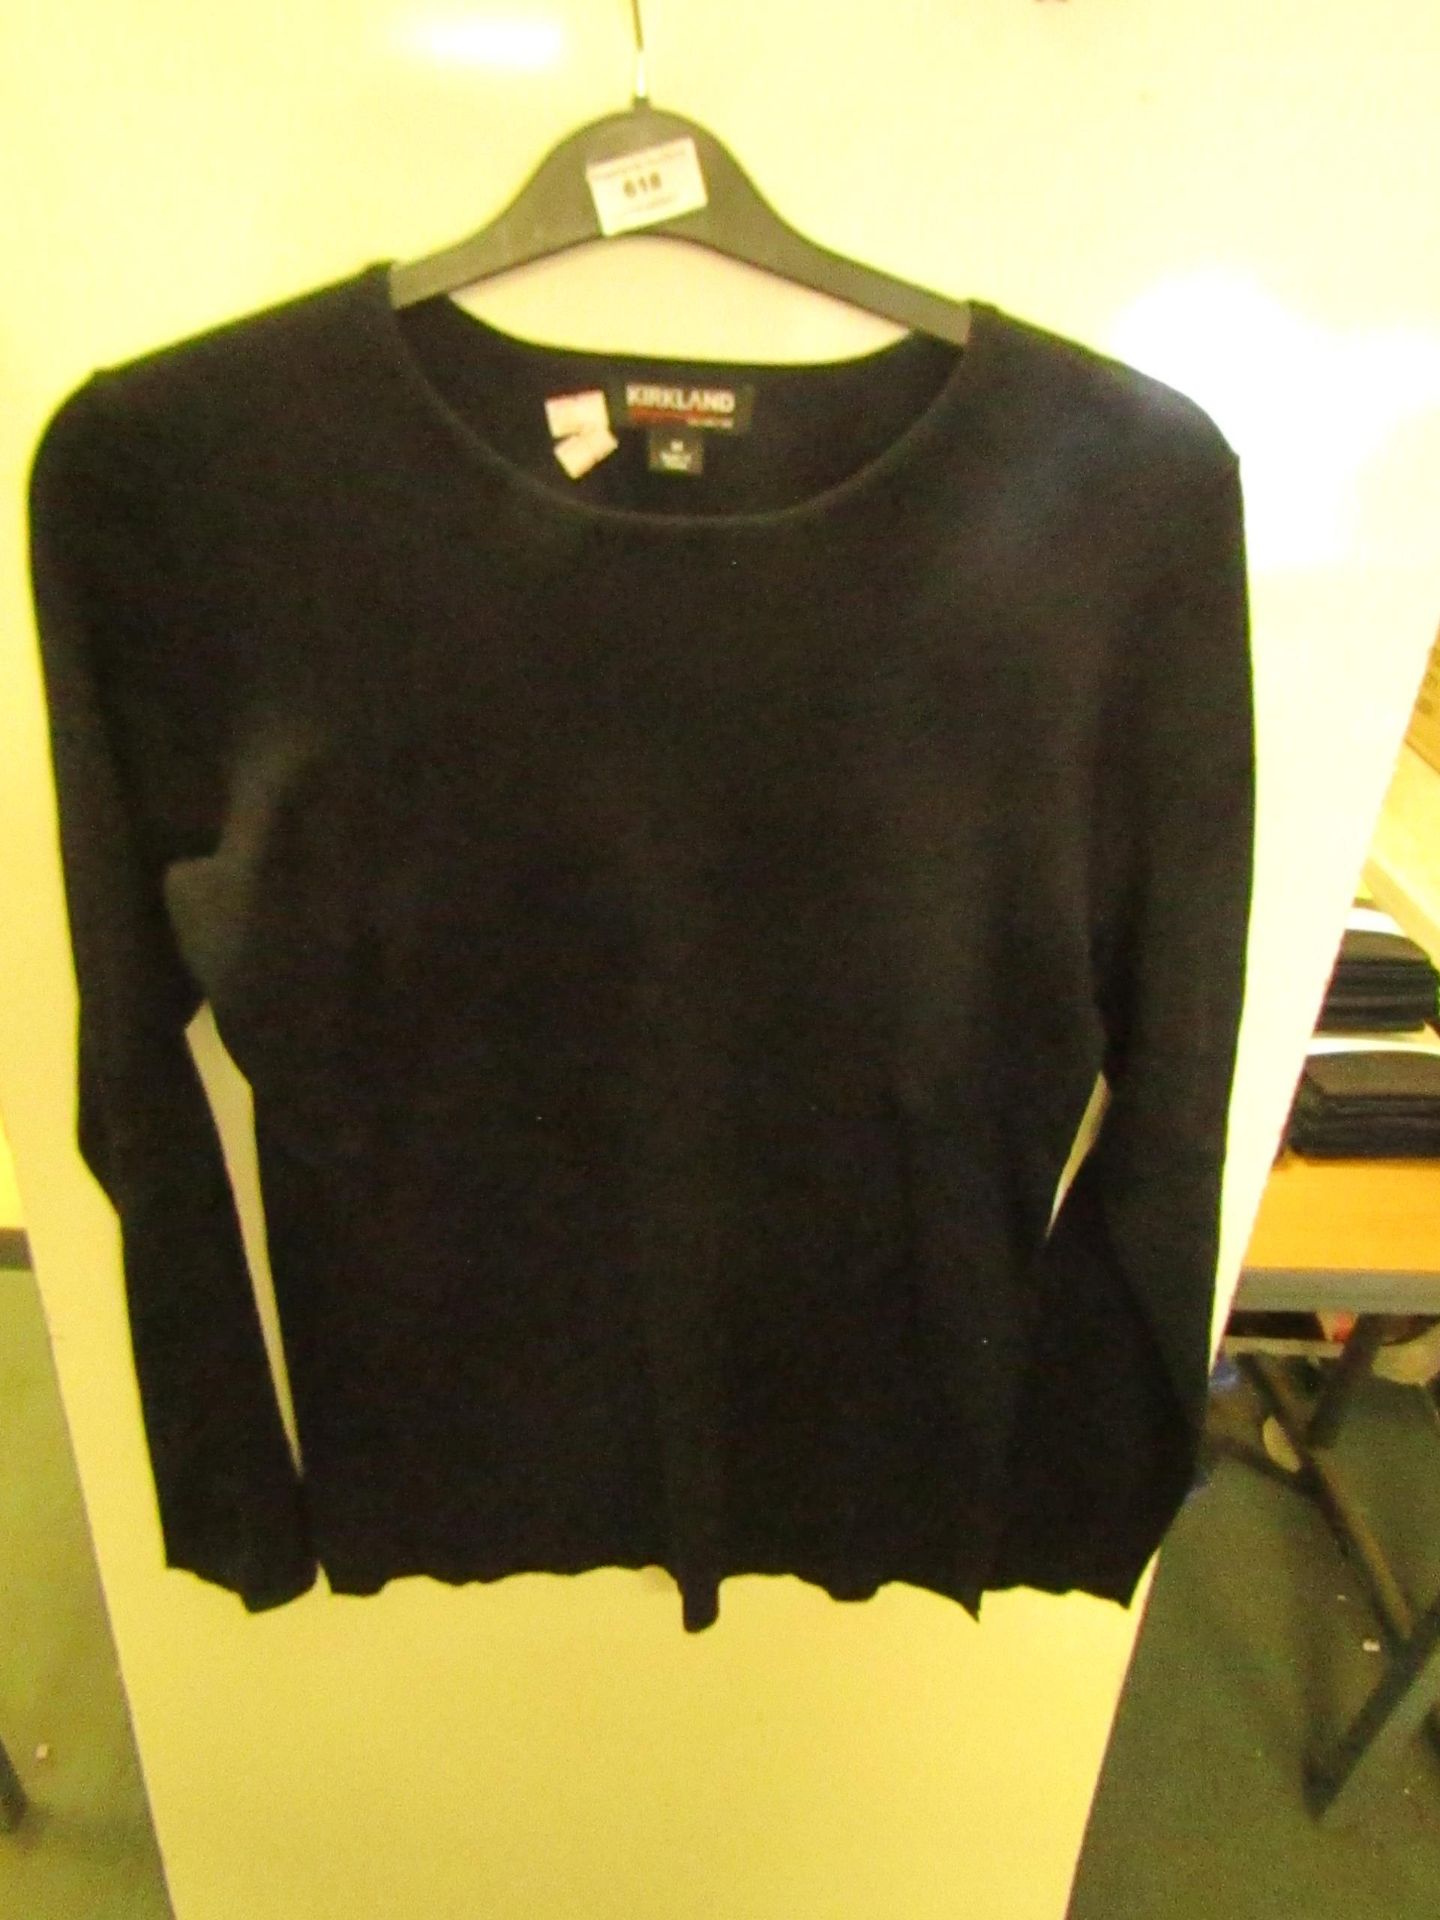 Kirkand Signature Ladies Crew Neck Sweater Black Size L New With Tags